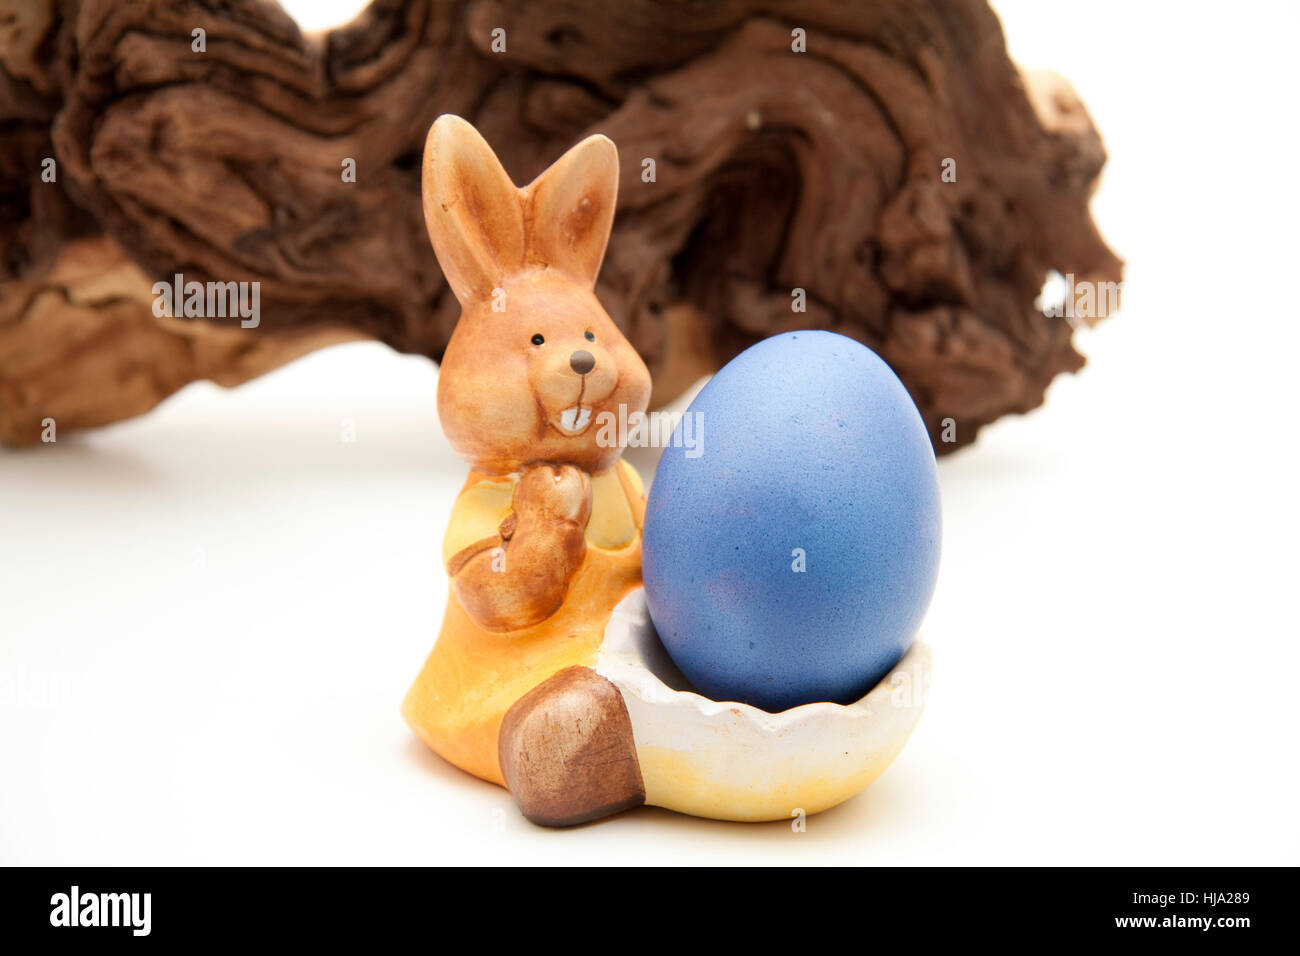 food, aliment, easter egg, hare, easter-bunny, egg, egg cup, food, aliment, Stock Photo